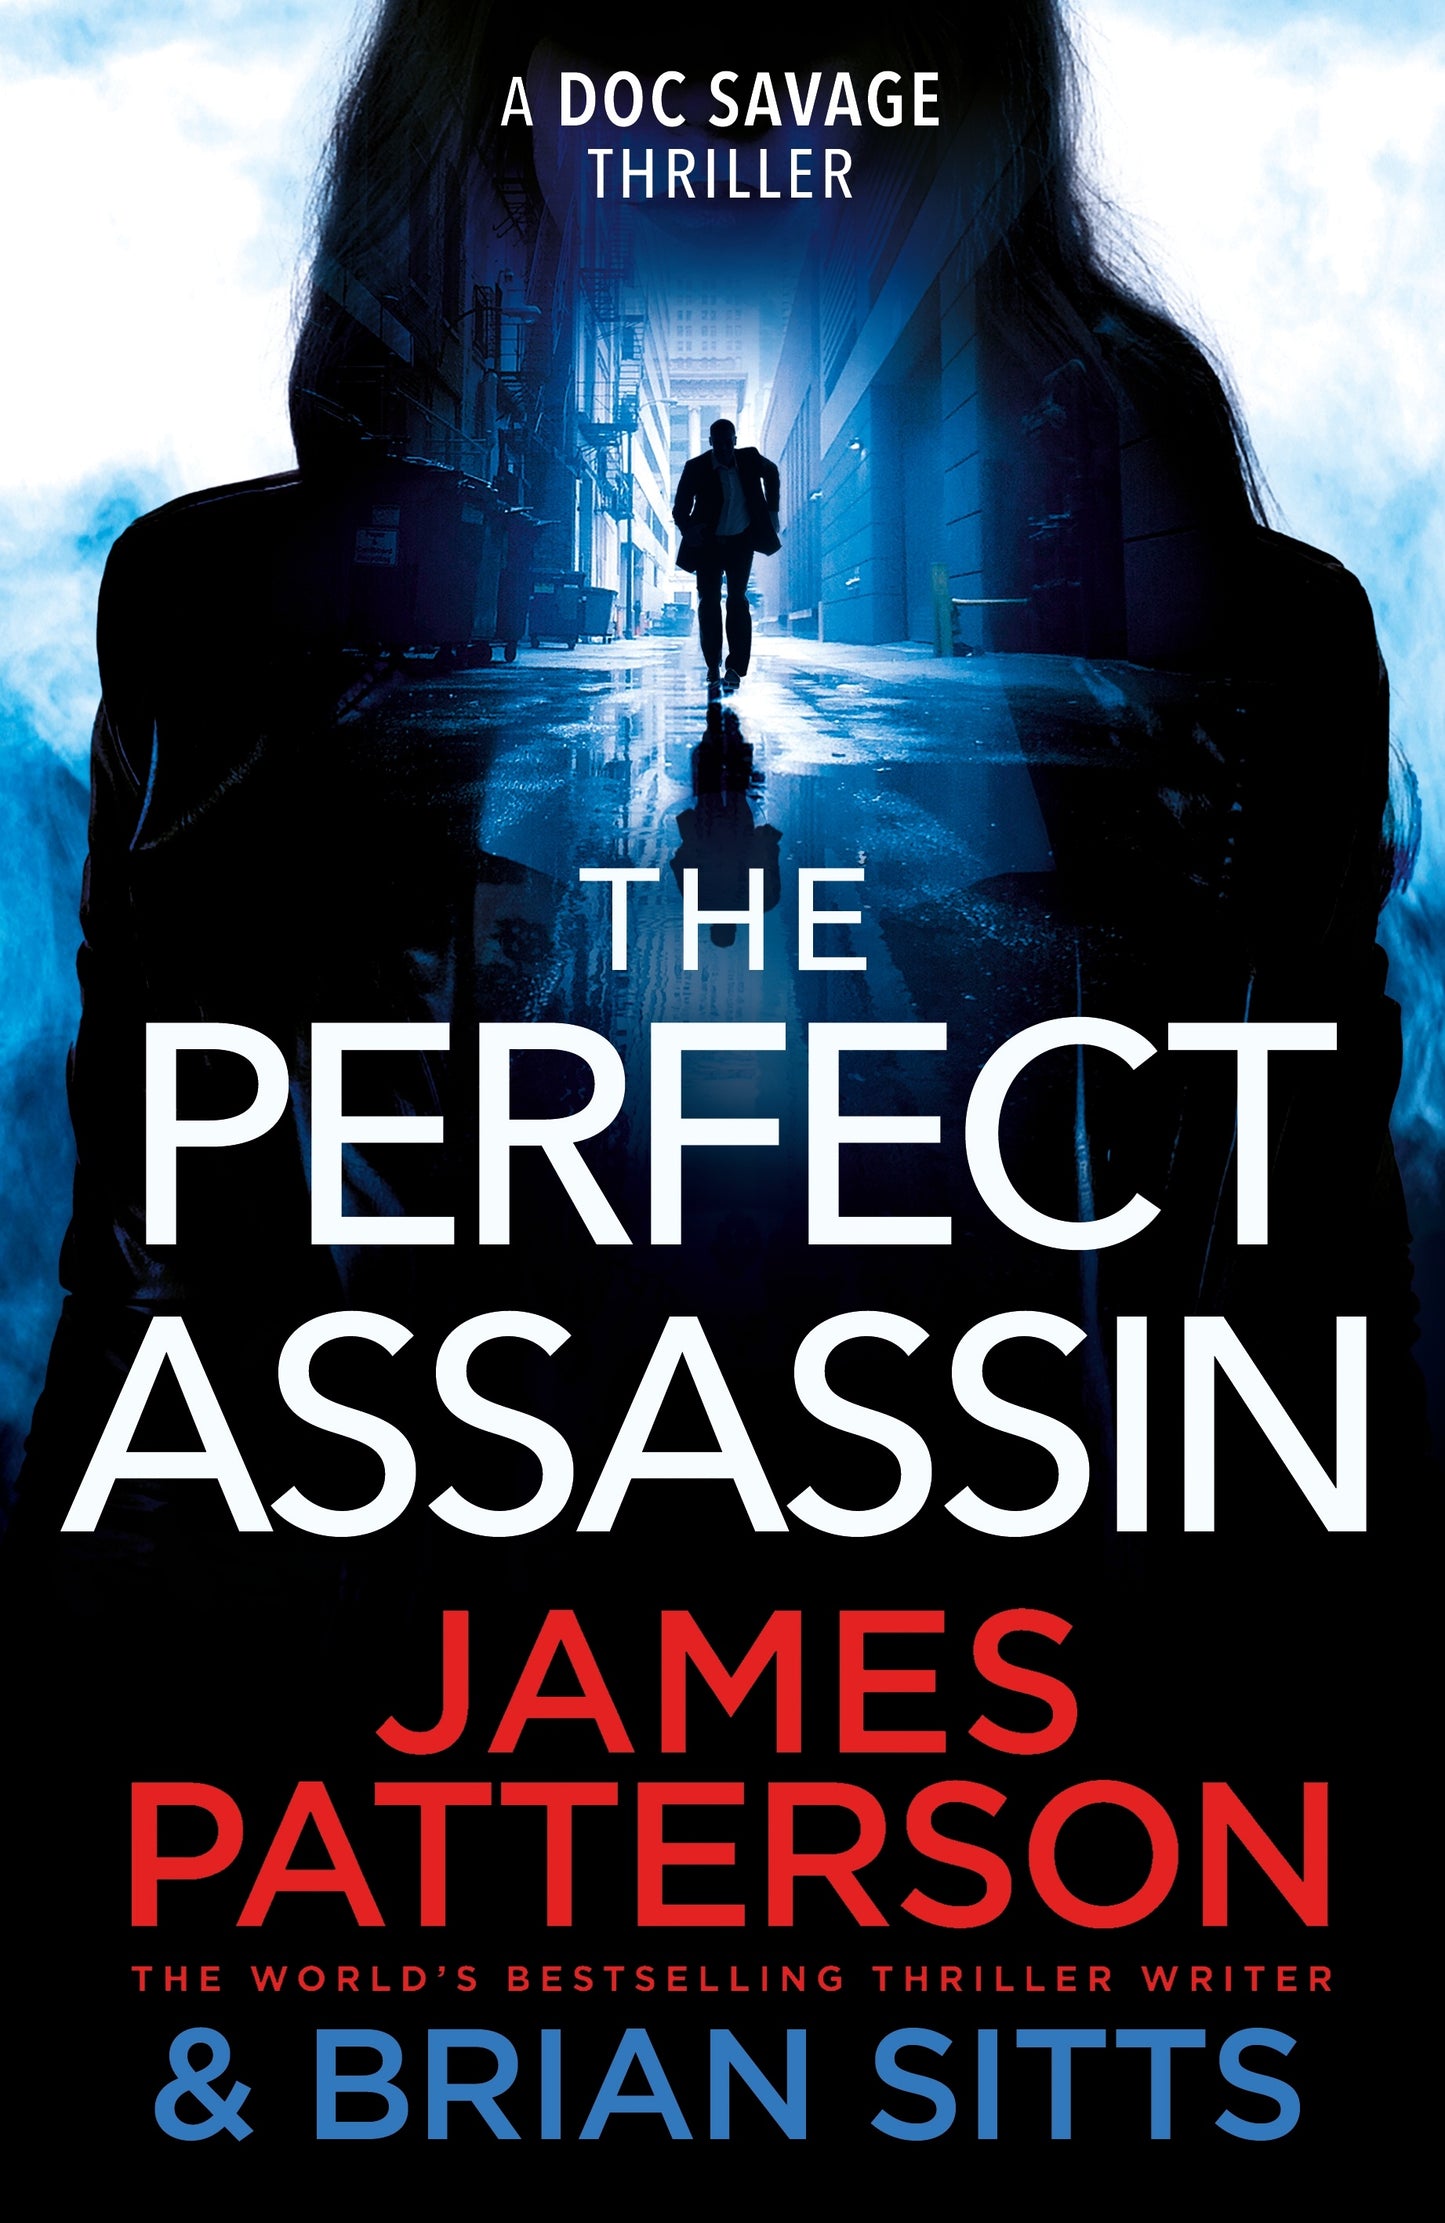 THE PERFECT ASSASSIN - JAMES PATTERSON